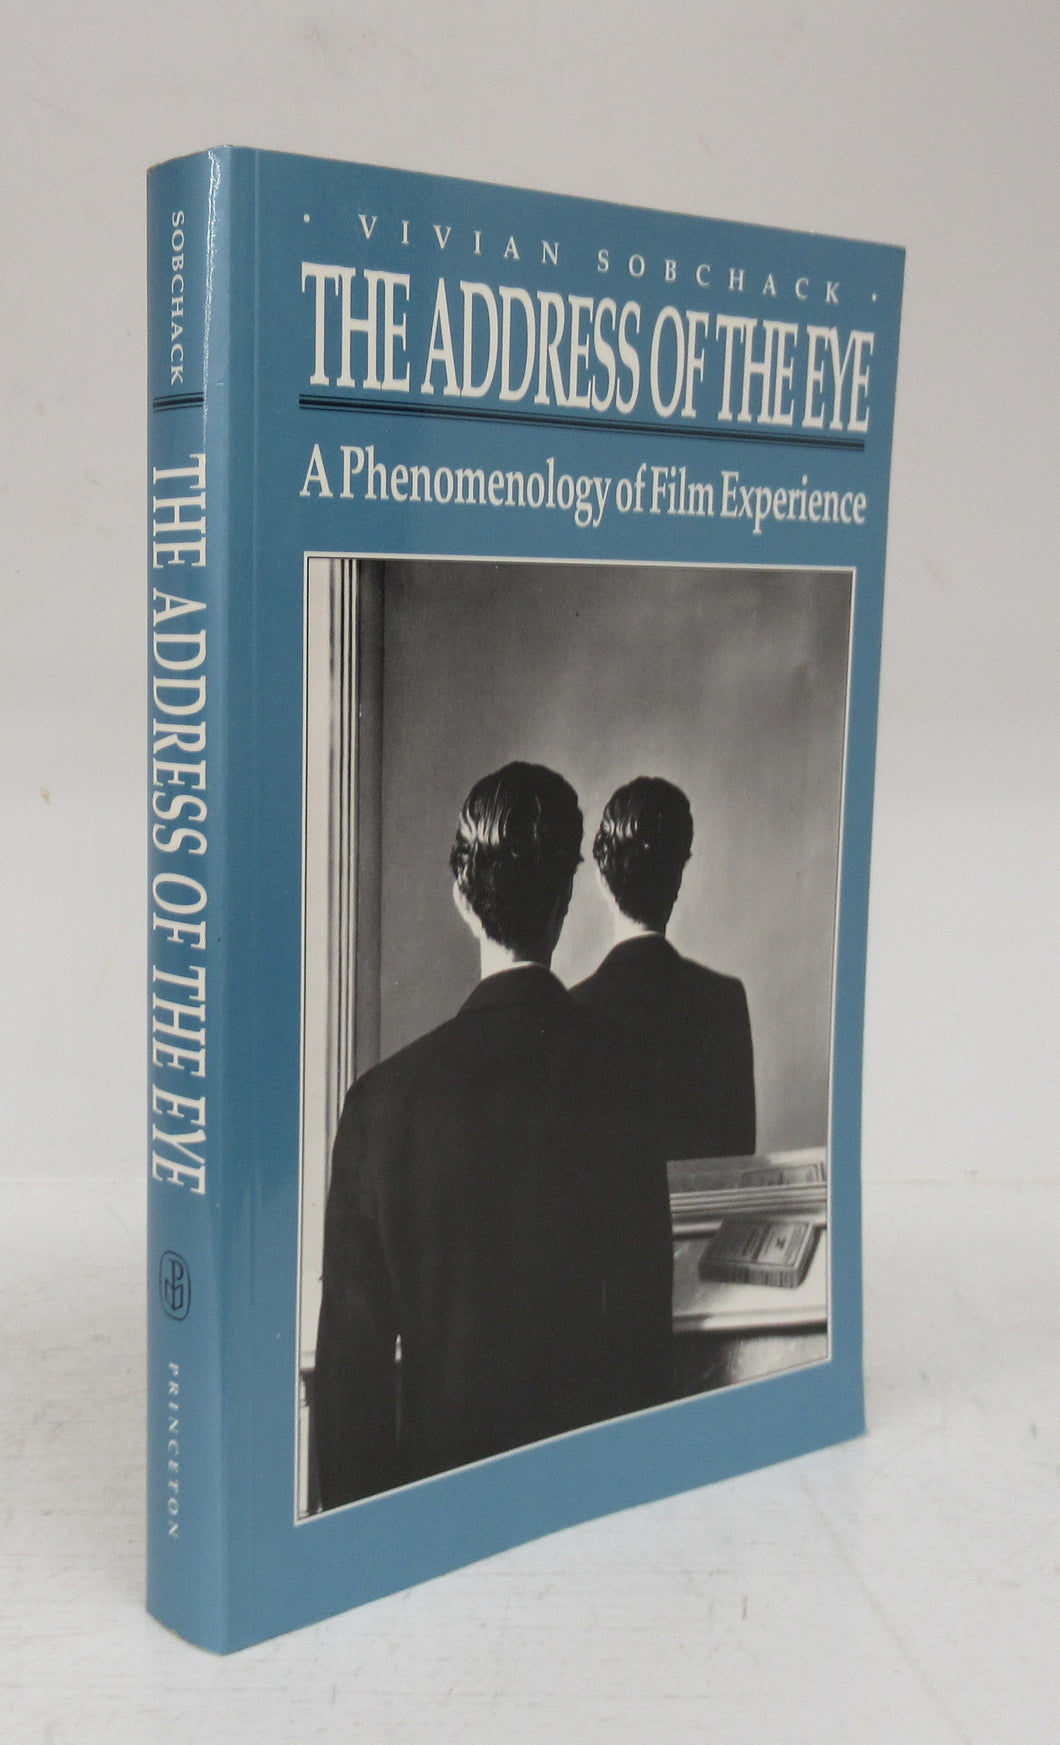 The Address of the Eye: A Phenomenology of Film Experience